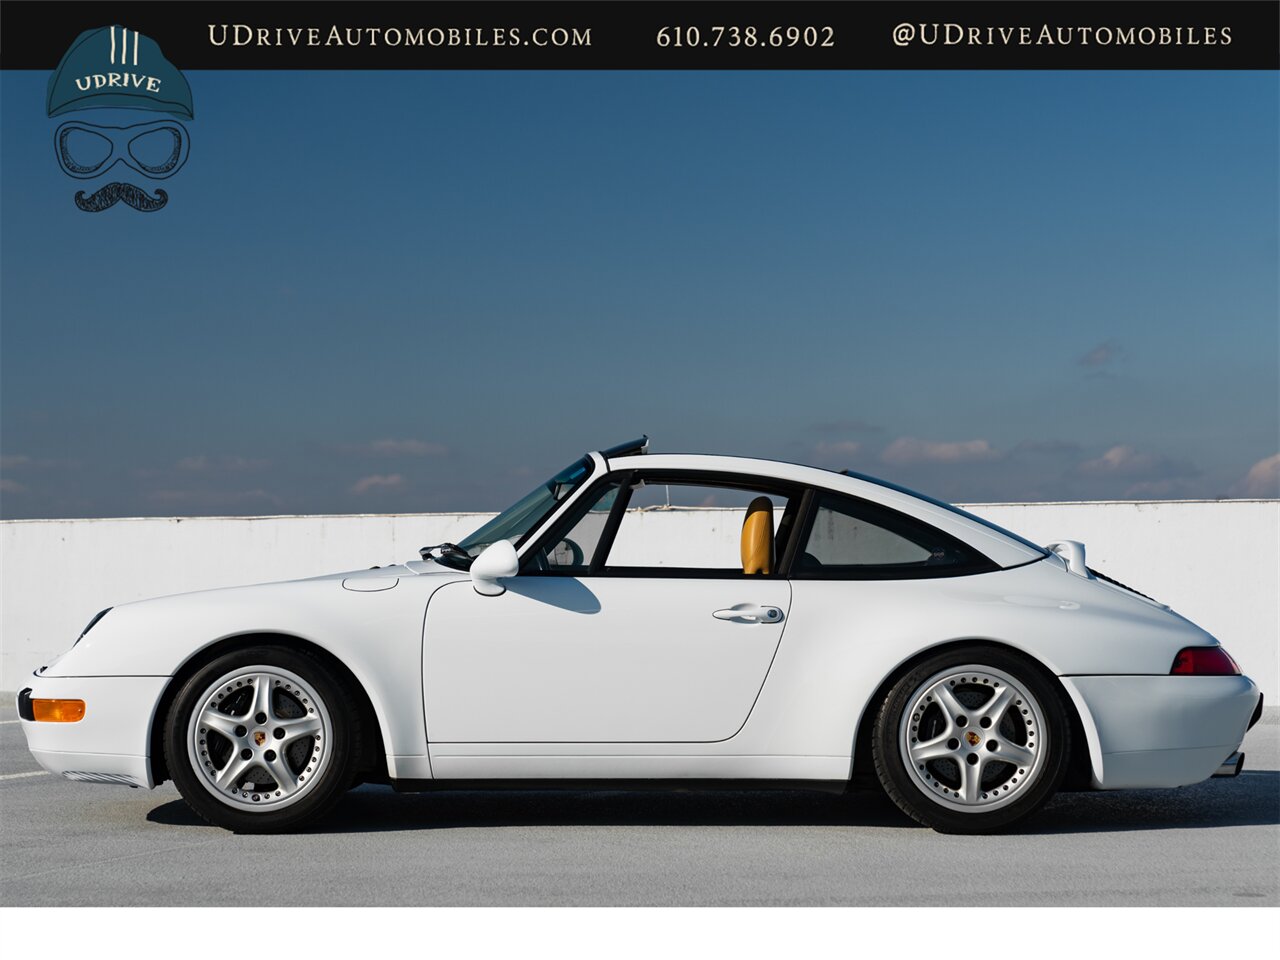 1998 Porsche 911 Carrera 993 Targa  1 of 122 Produced 6 Speed $10k Recent Service Engine Reseal - Photo 9 - West Chester, PA 19382